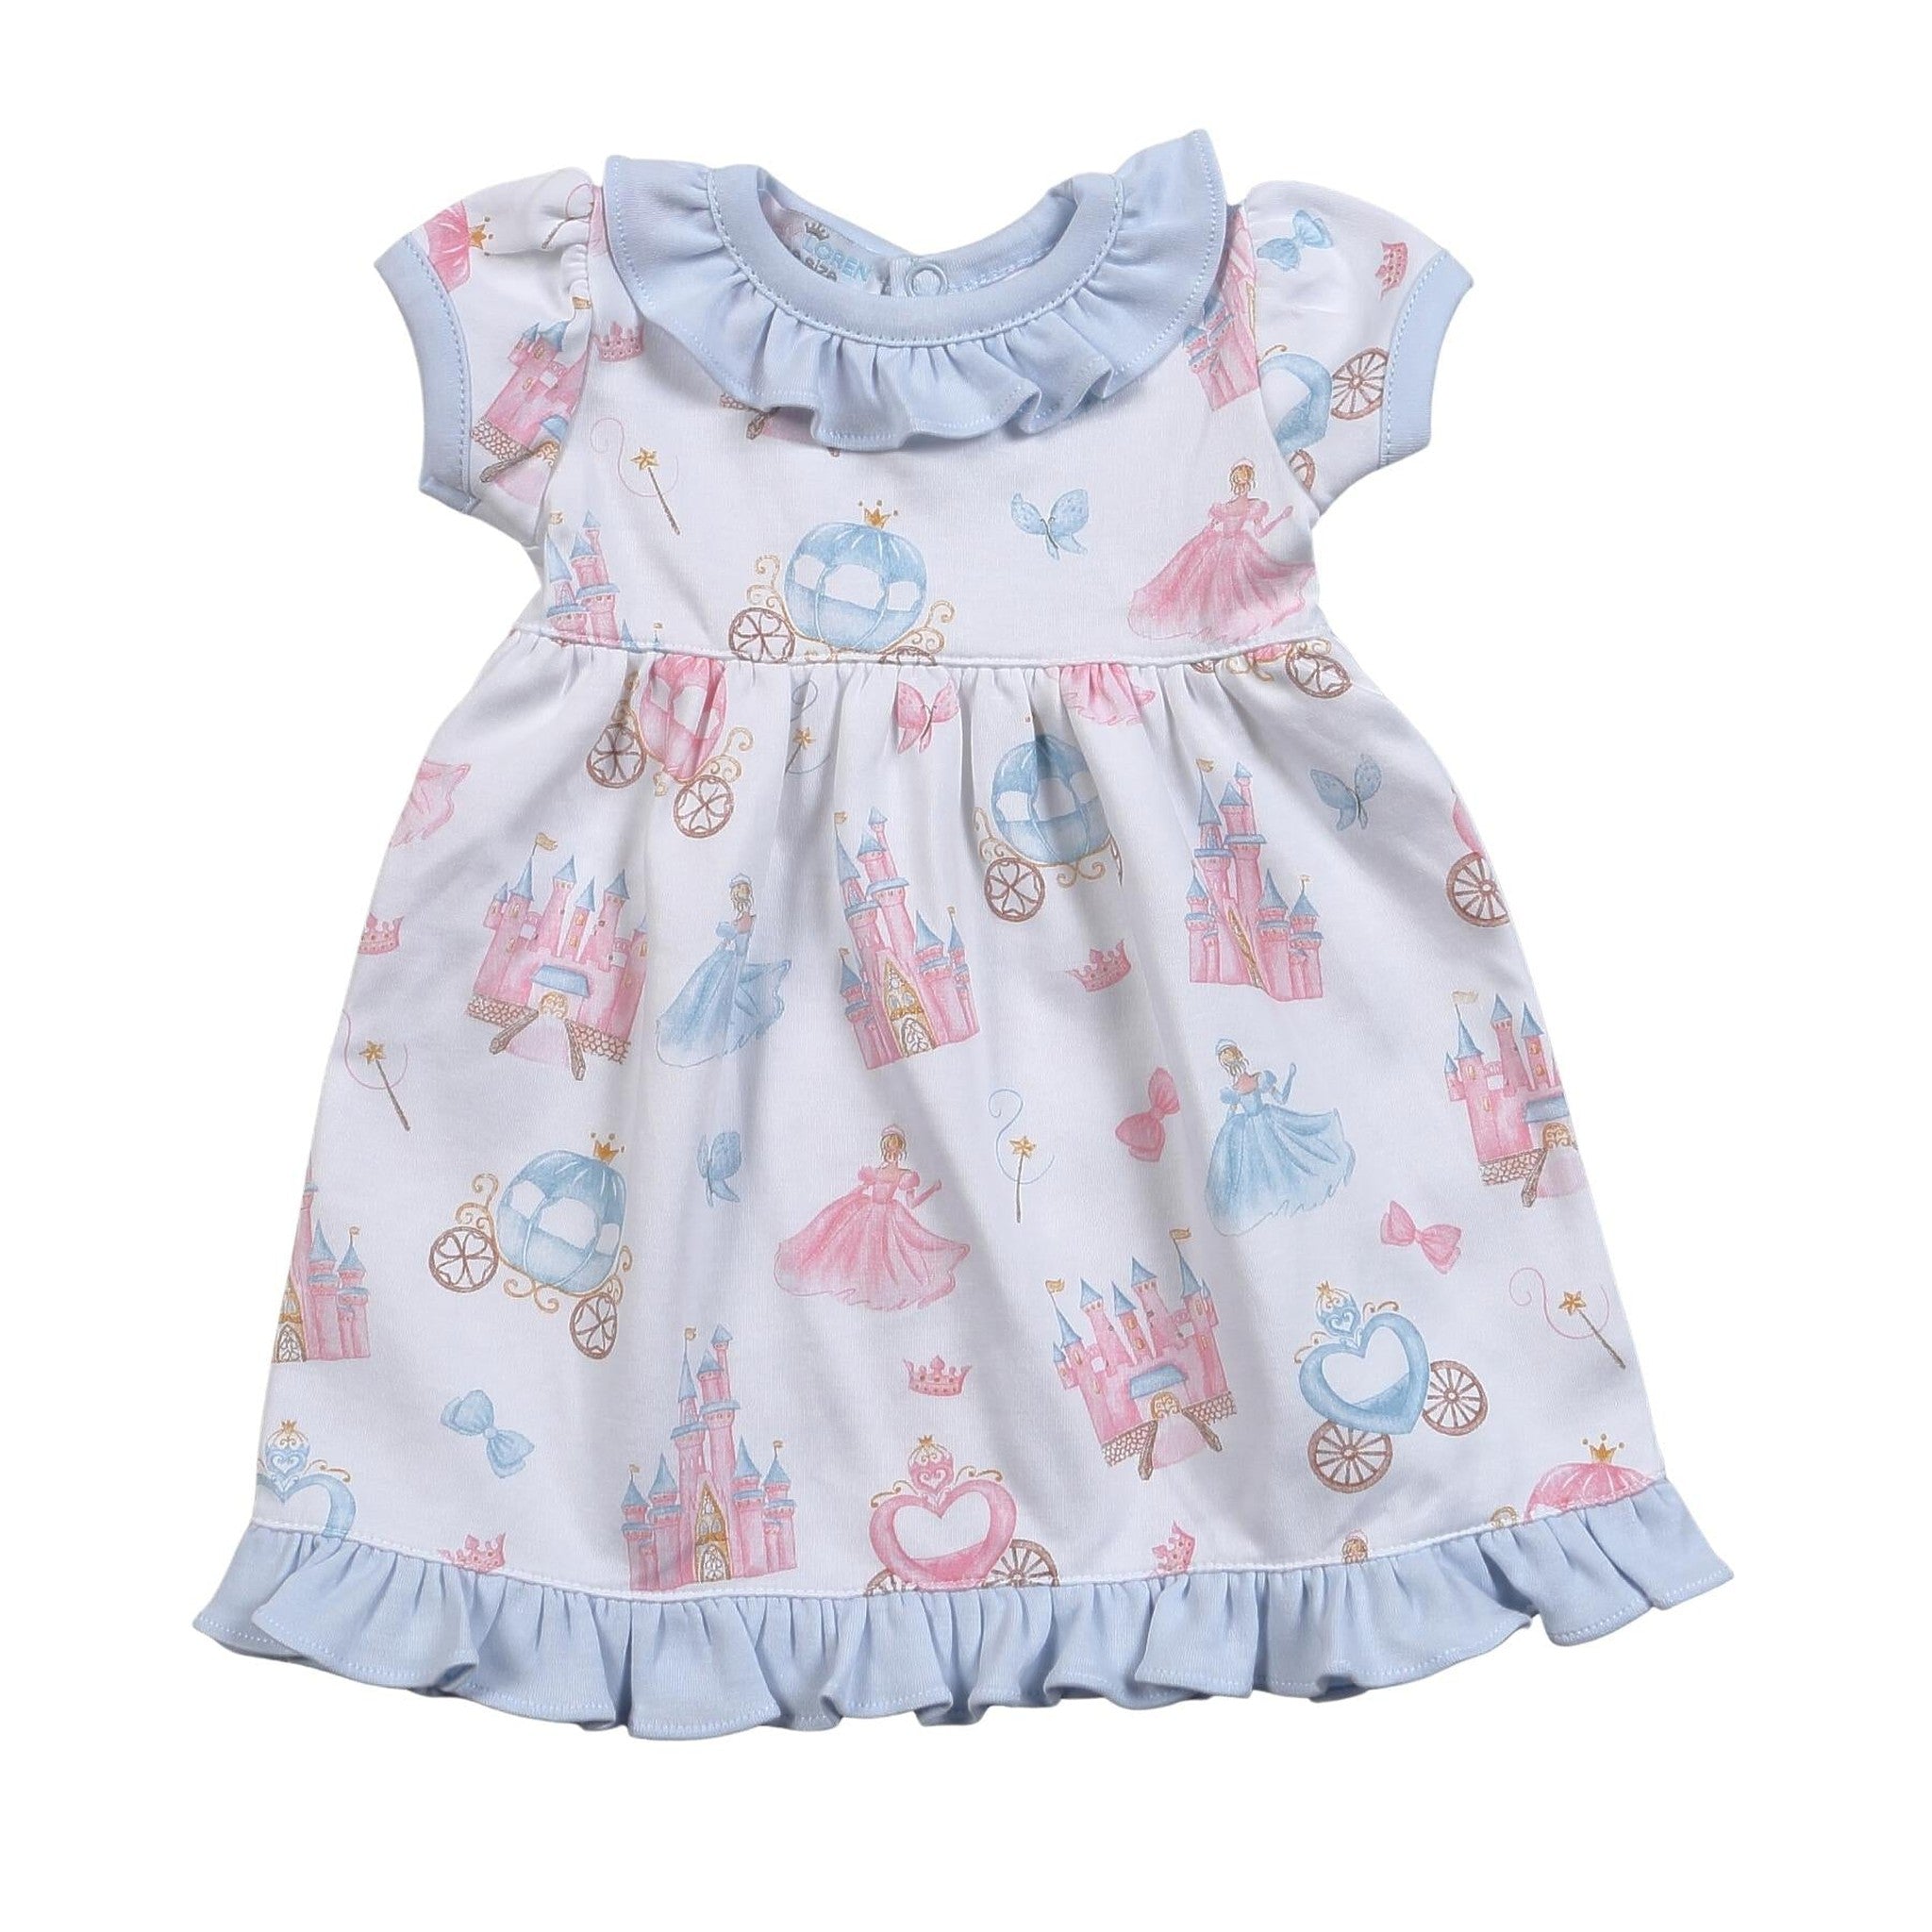 Princess and Castles Pima Doll Gown